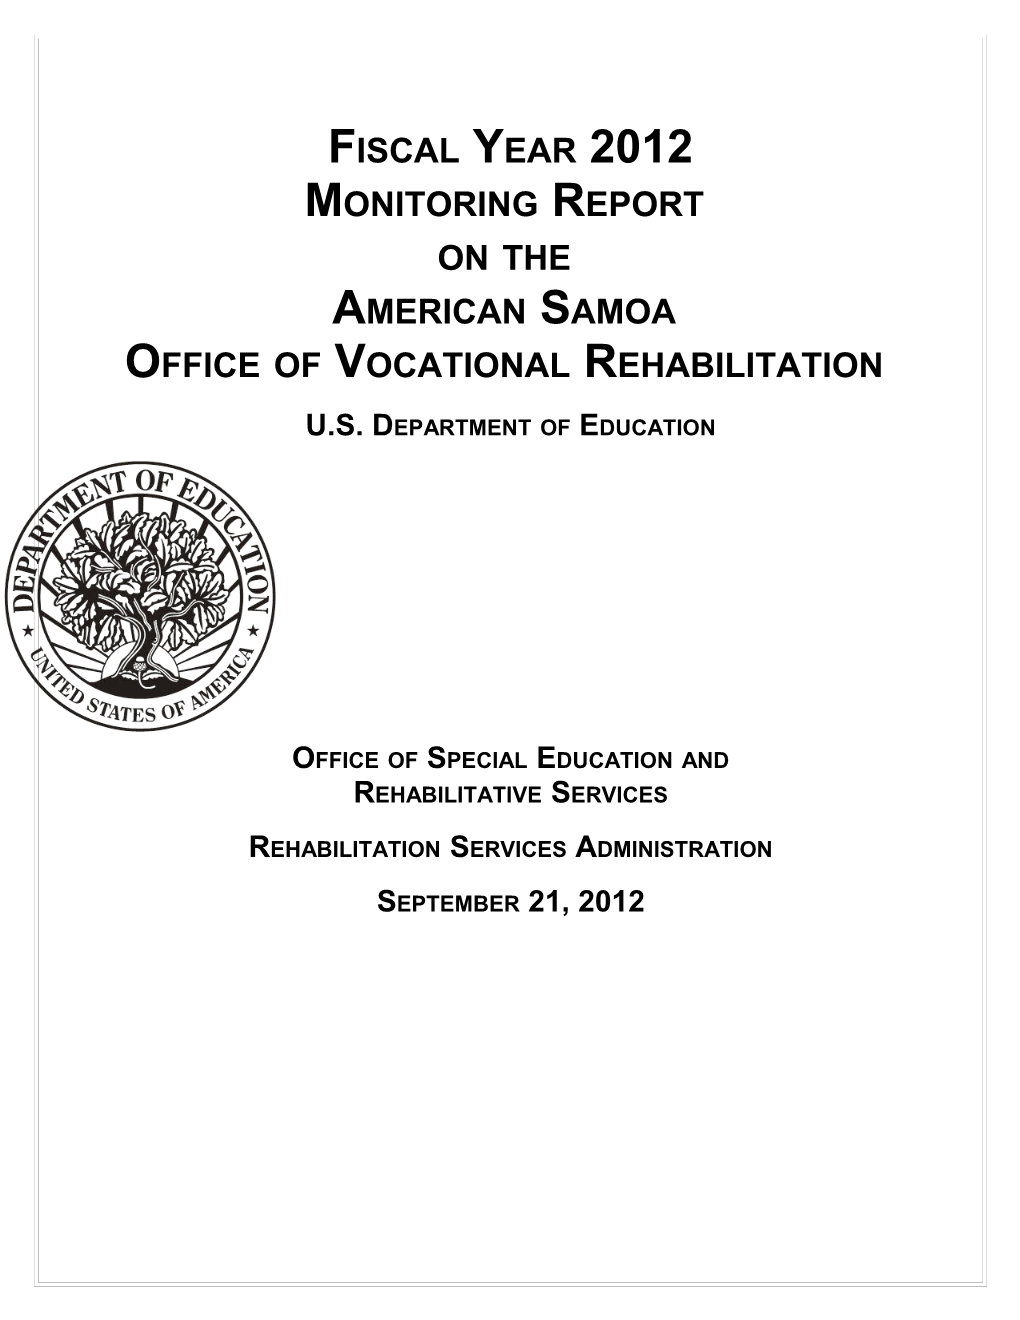 Fiscal Year 2012 Monitoring Report on American Samoa Office of Vocational Rehabilitation